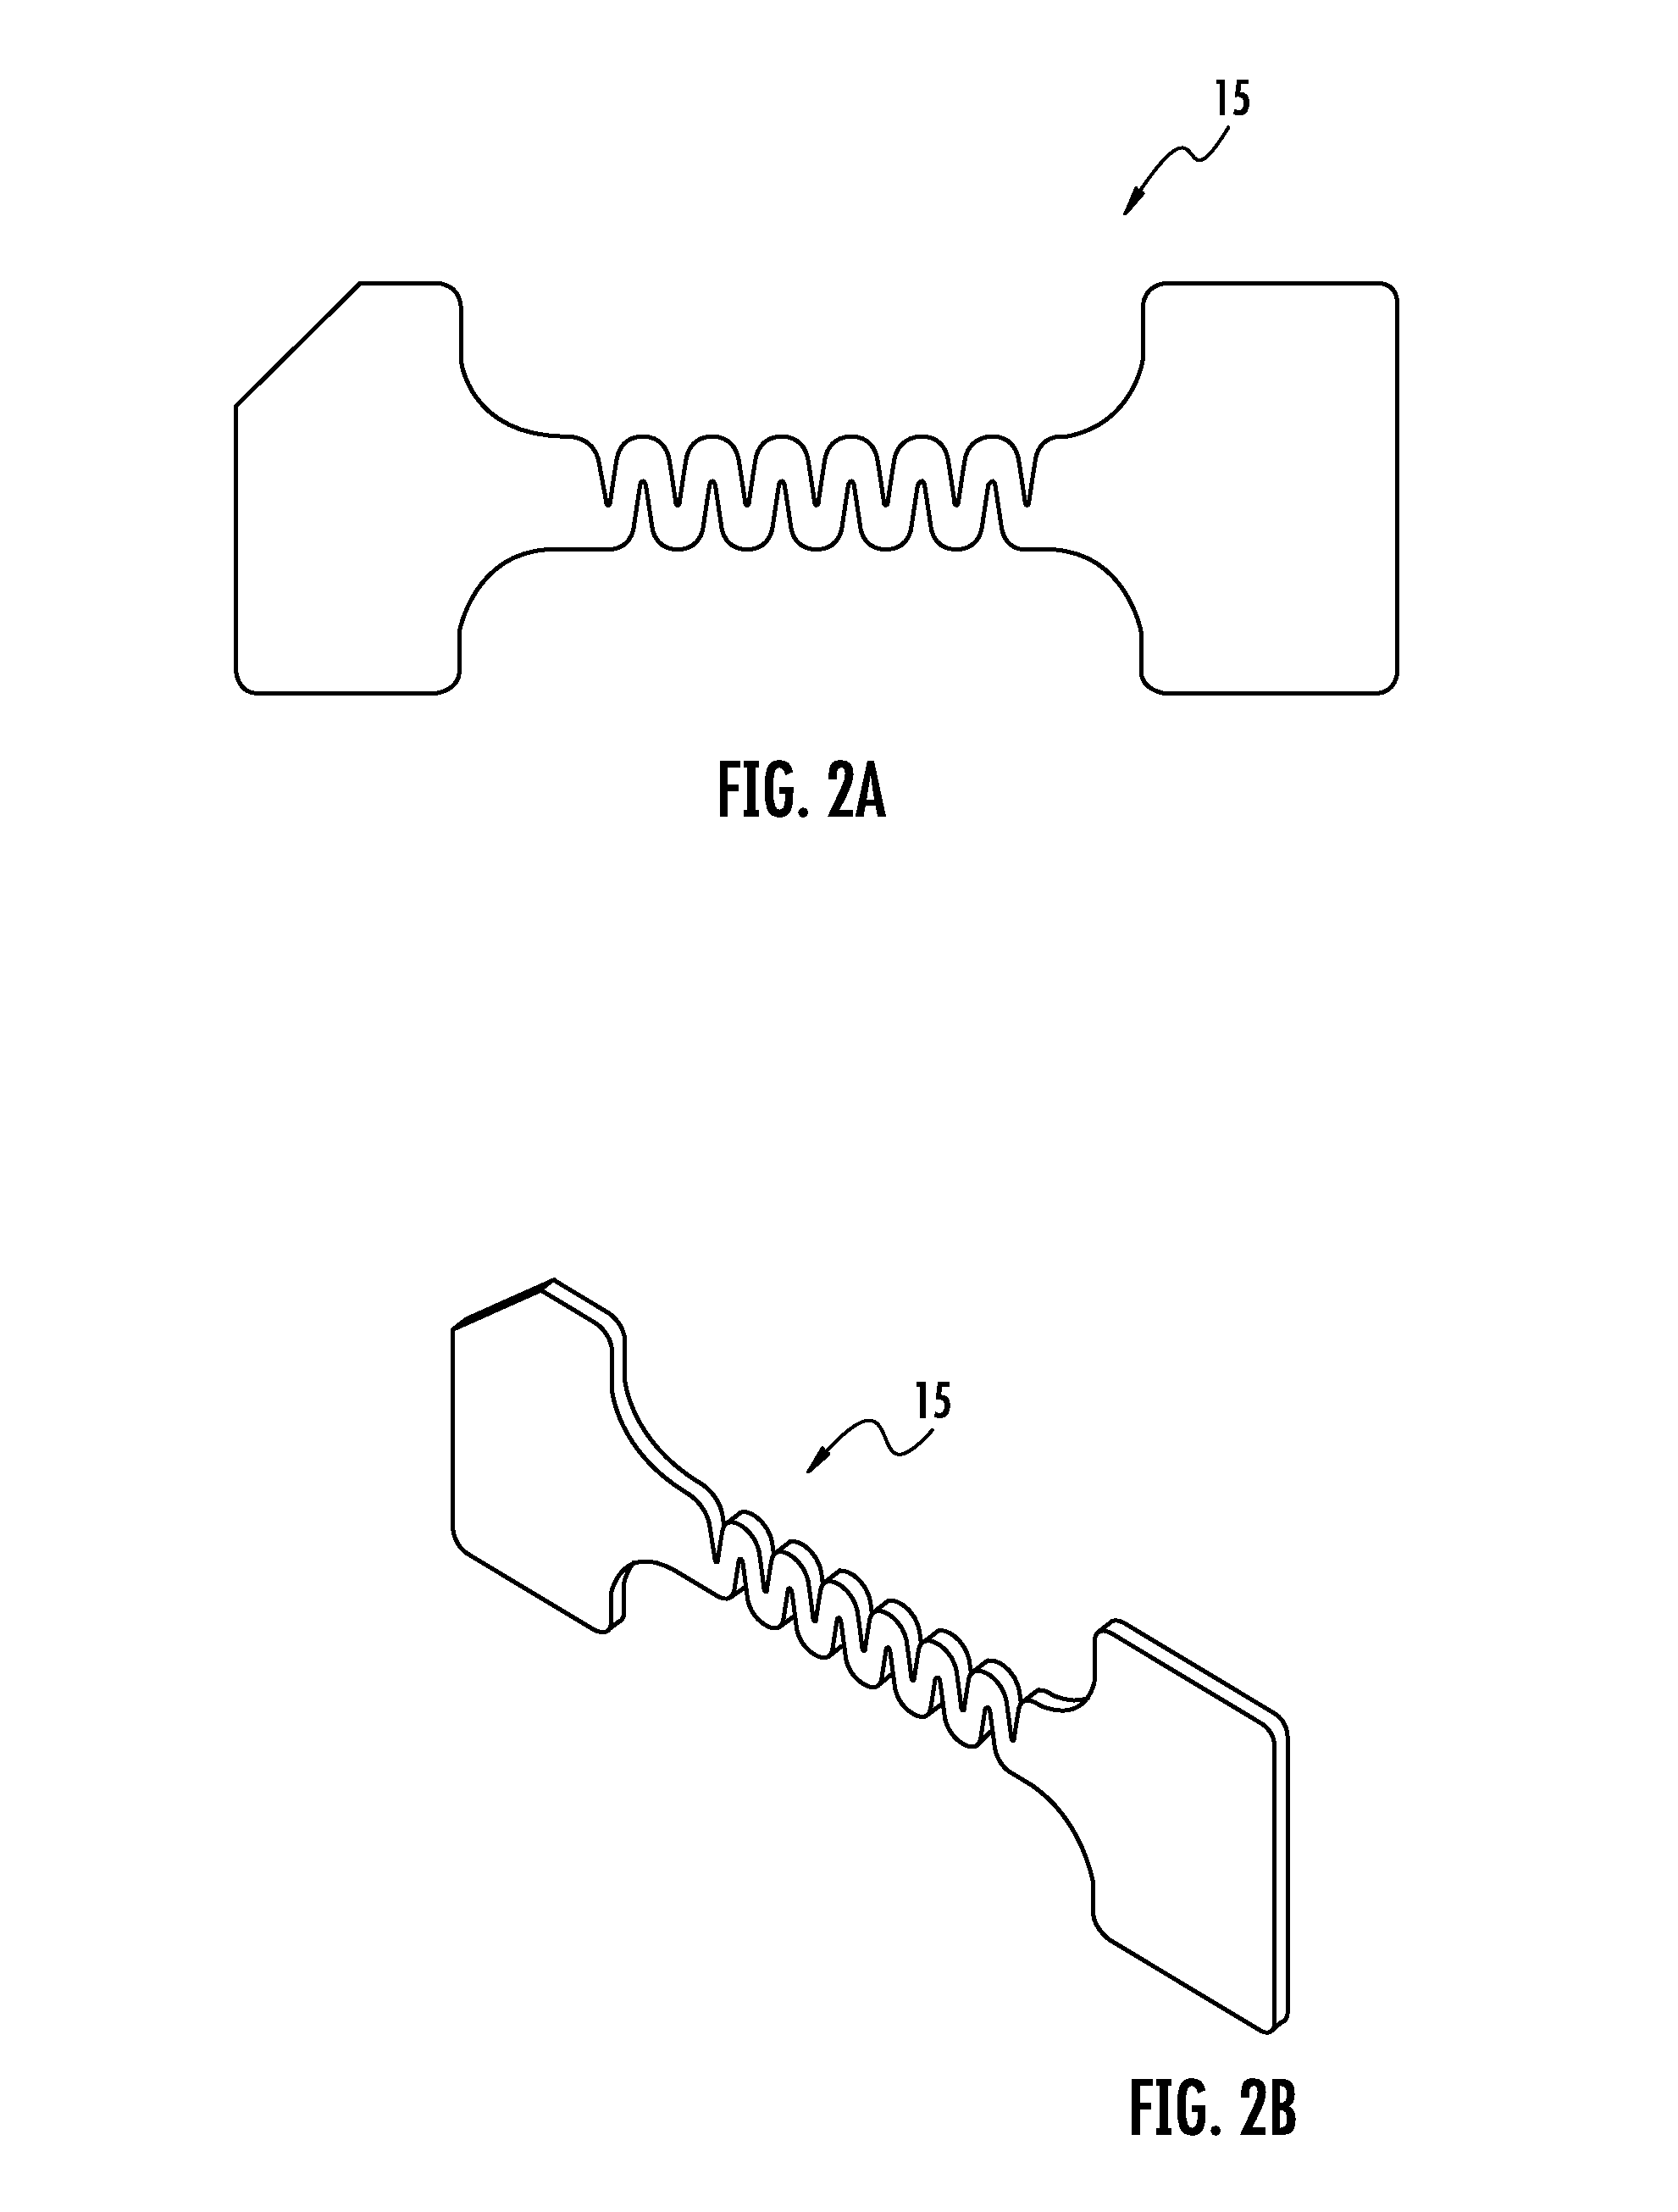 Method for Producing a Subminiature "Micro-Chip" Oxygen Sensor for Control of Internal Combustion Engines or Other Combustion Processes, Oxygen Sensor and an Exhaust Safety Switch